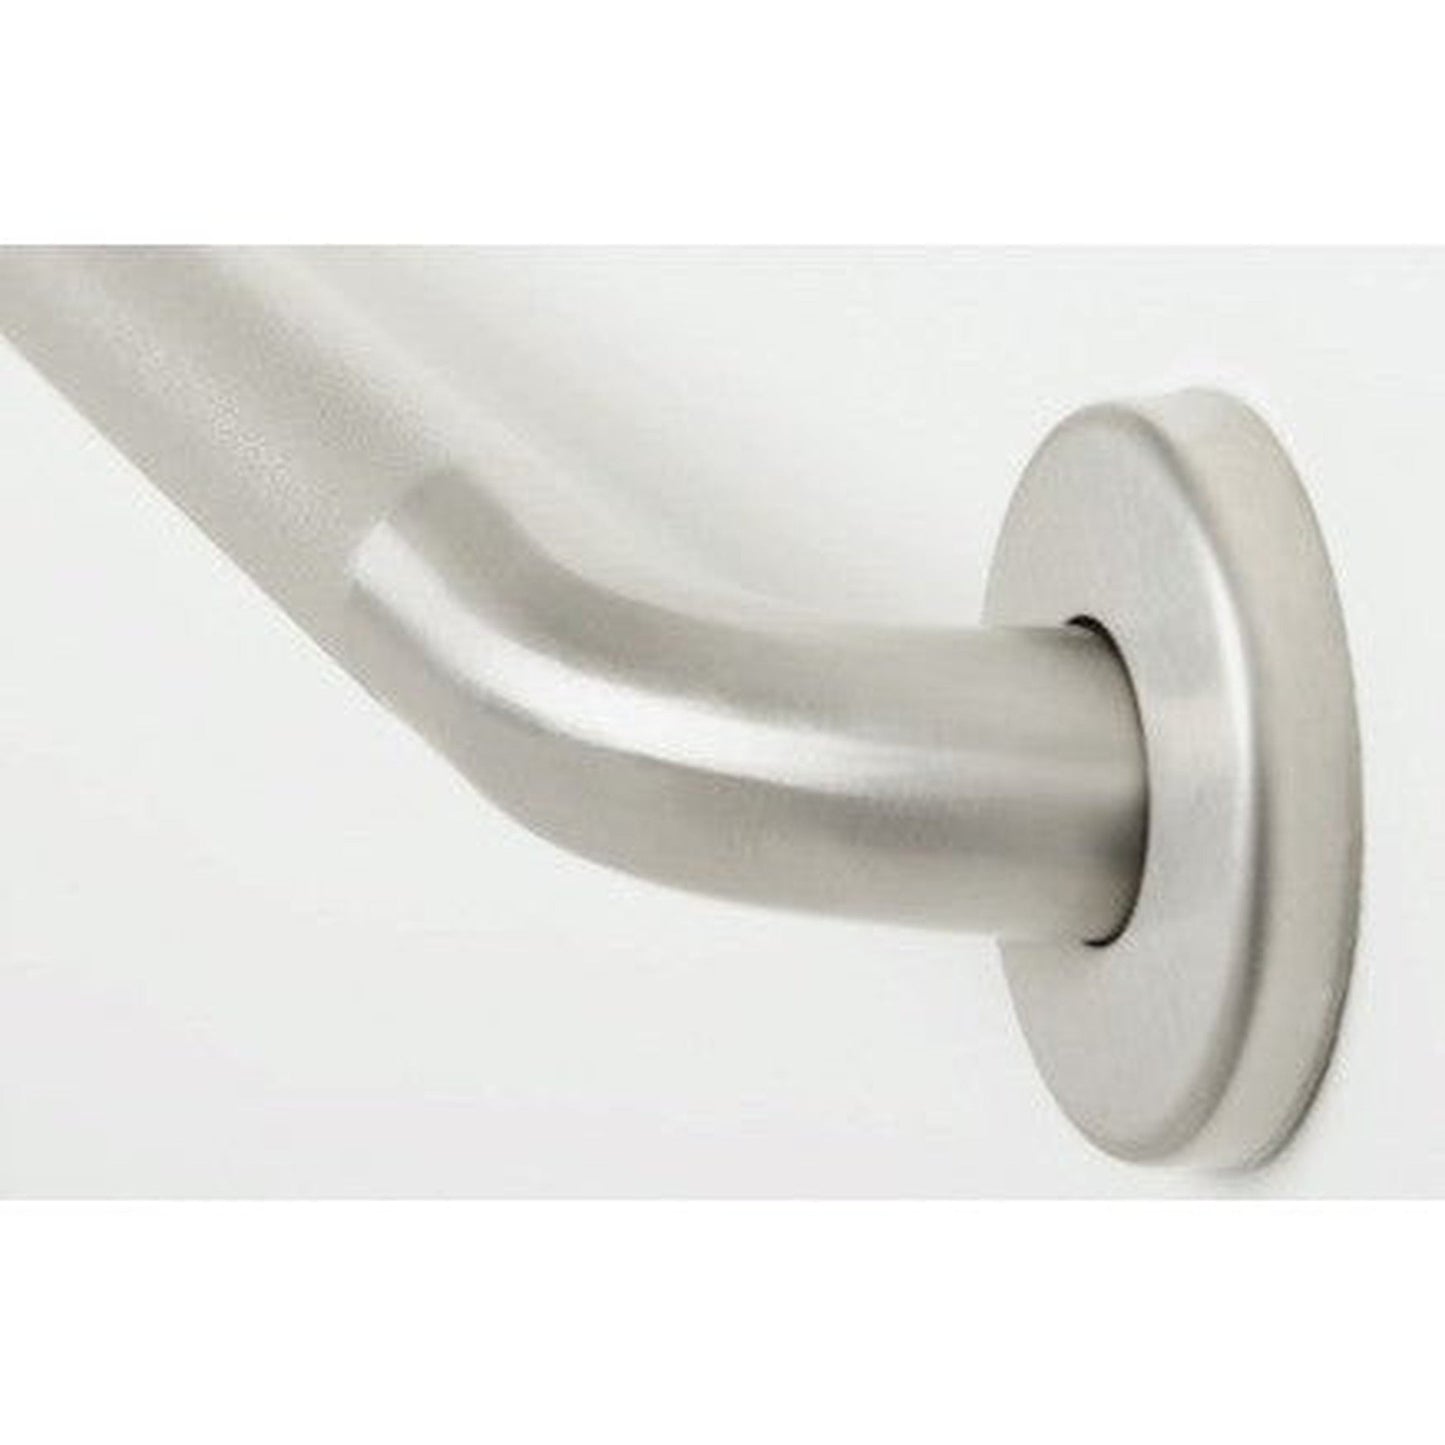 Seachrome Signature GY Series 24" Peened With Satin Stainless Steel Ends 1.5" Tube Diameter Straight Grab Bar